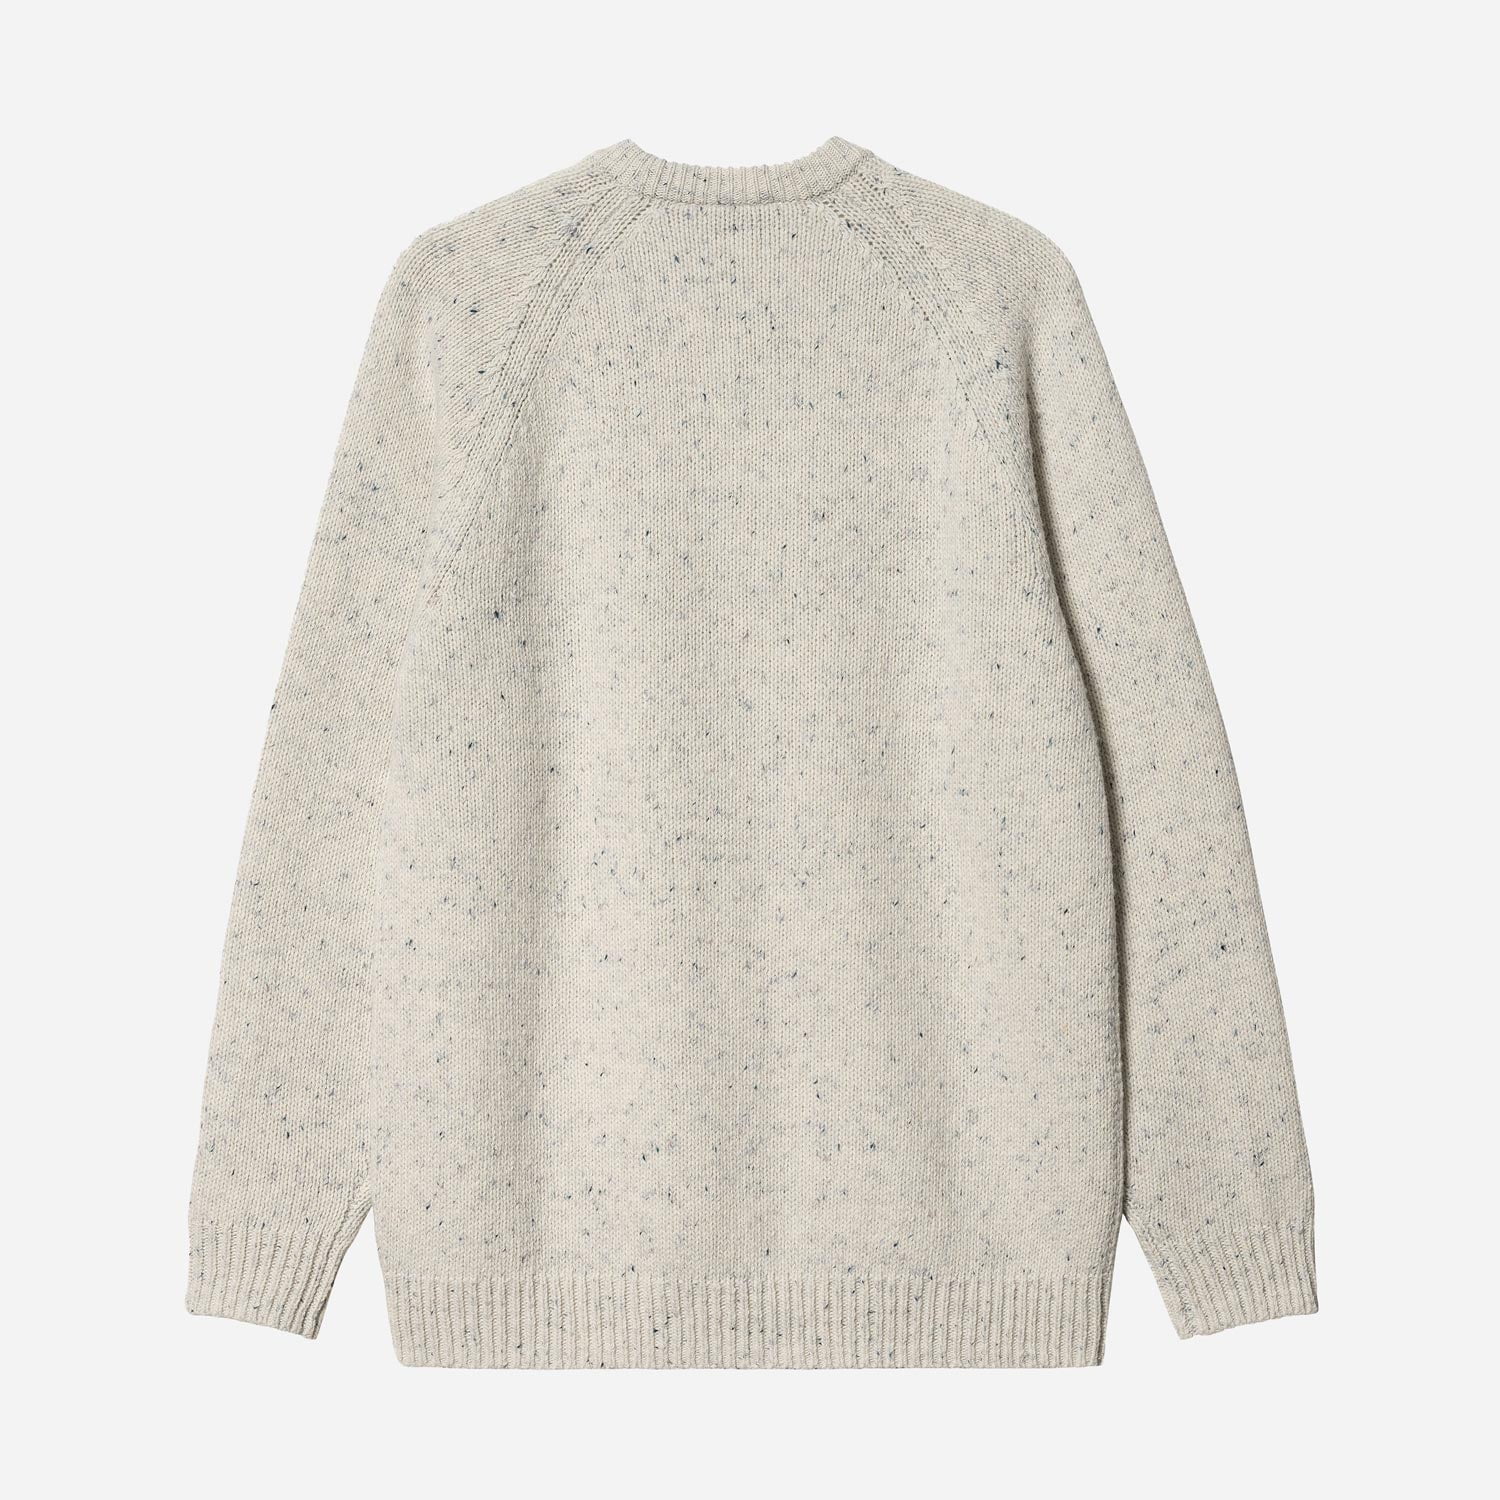 Carhartt WIP Anglistic Regular Fit Knitted Sweater - Speckled Salt